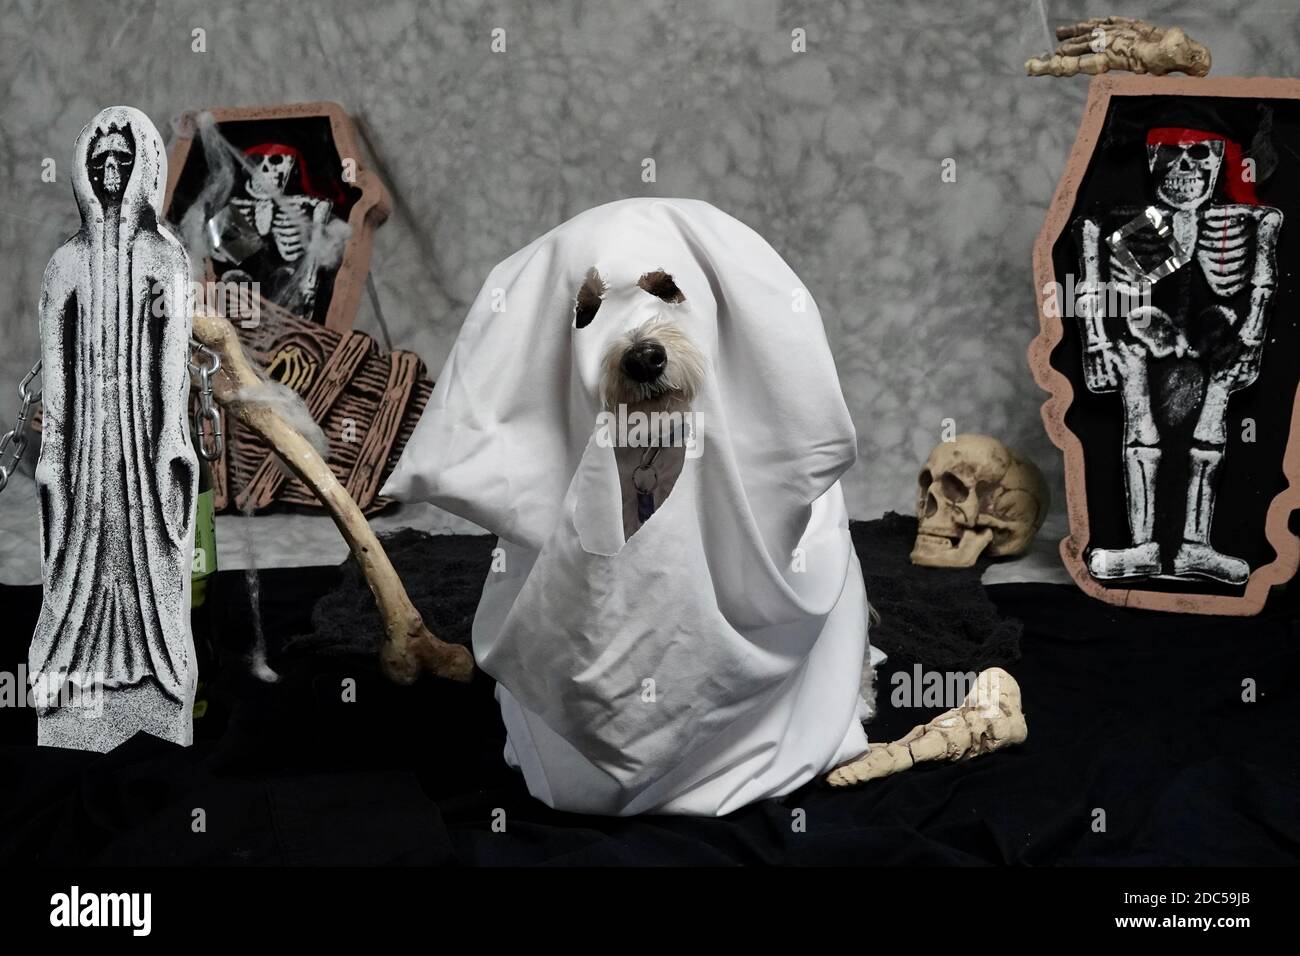 A dog is dressed as a ghost for a portrait for Halloween. Stock Photo